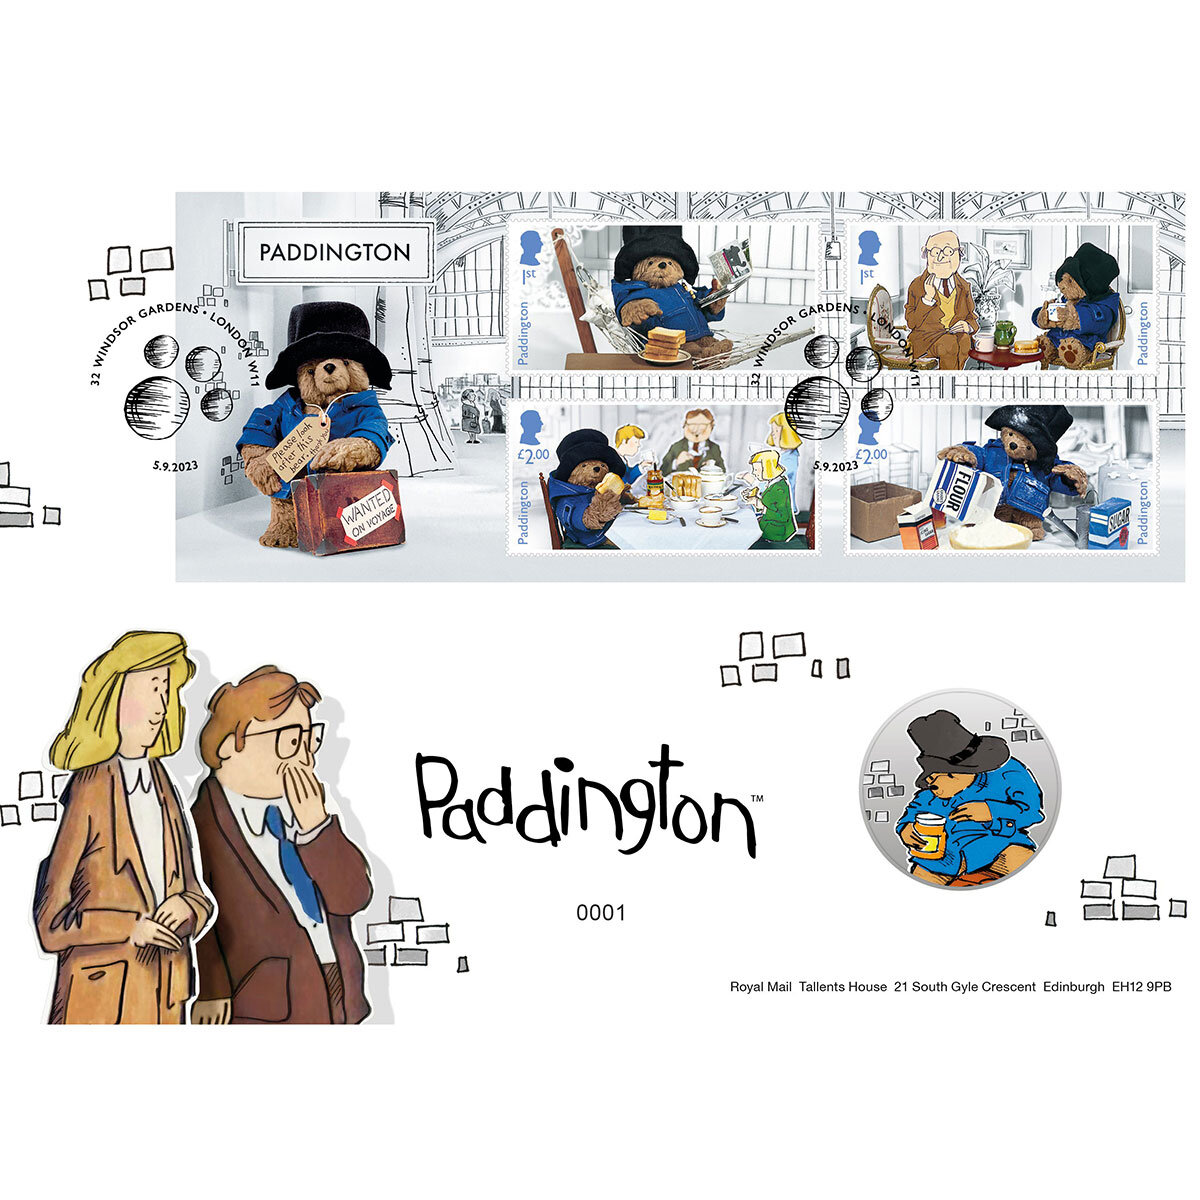 Official Paddington Medal Cover by Royal Mail